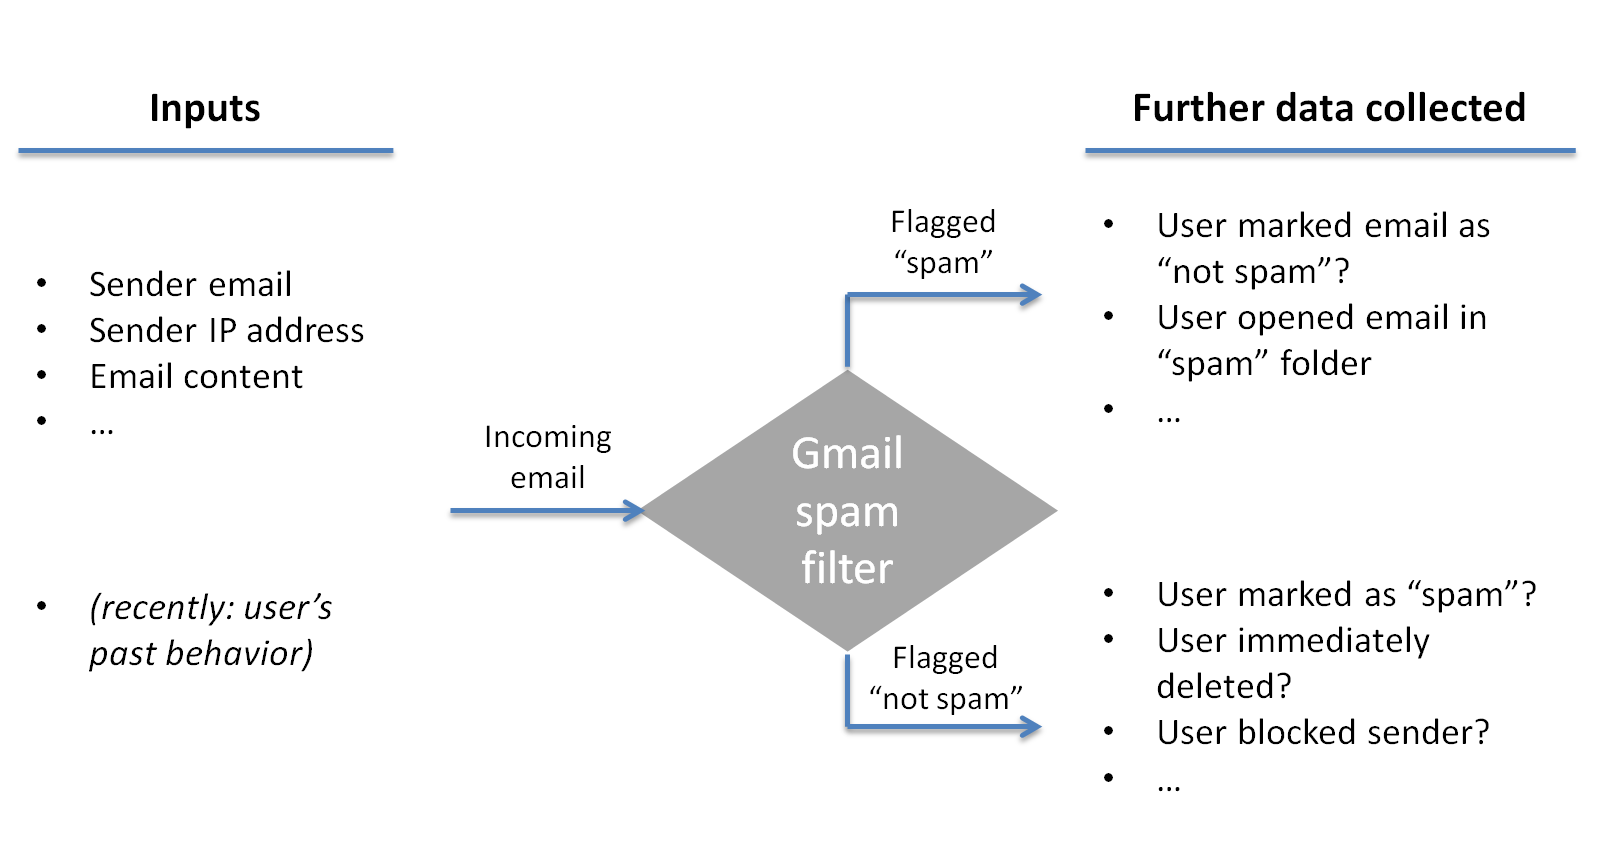 gmail-spam-filter